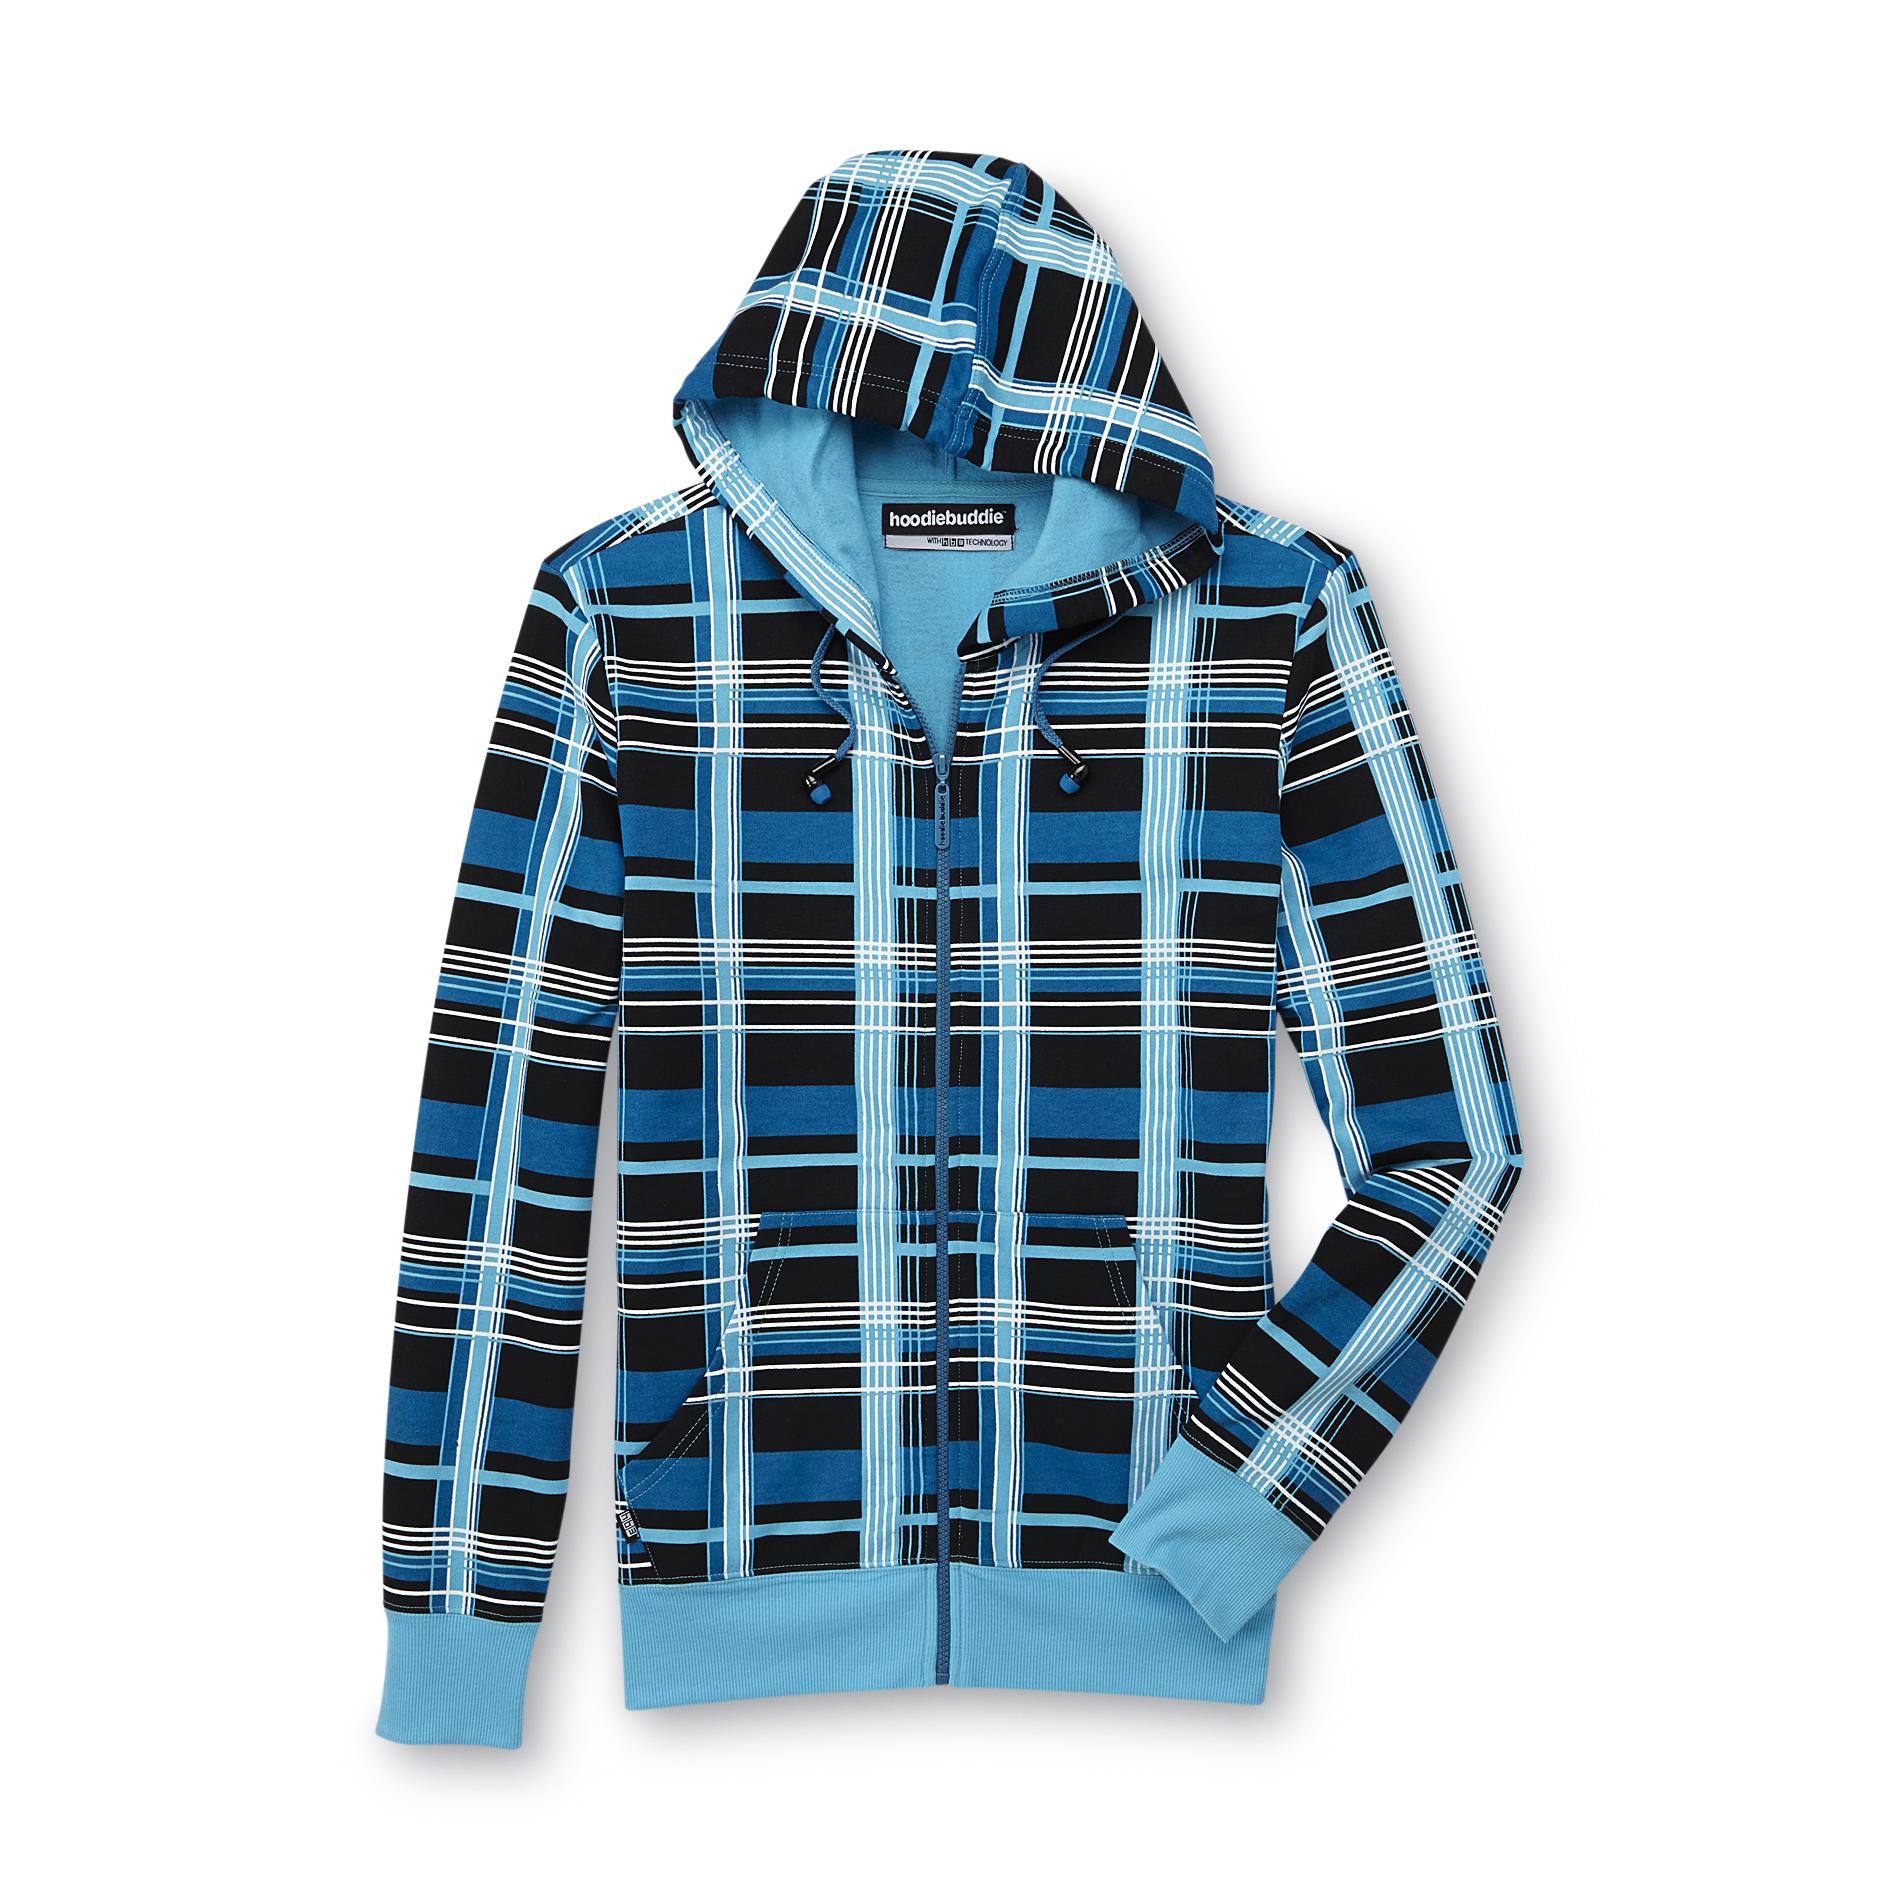 Young Men's Hoodie Jacket & Earbuds - Plaid